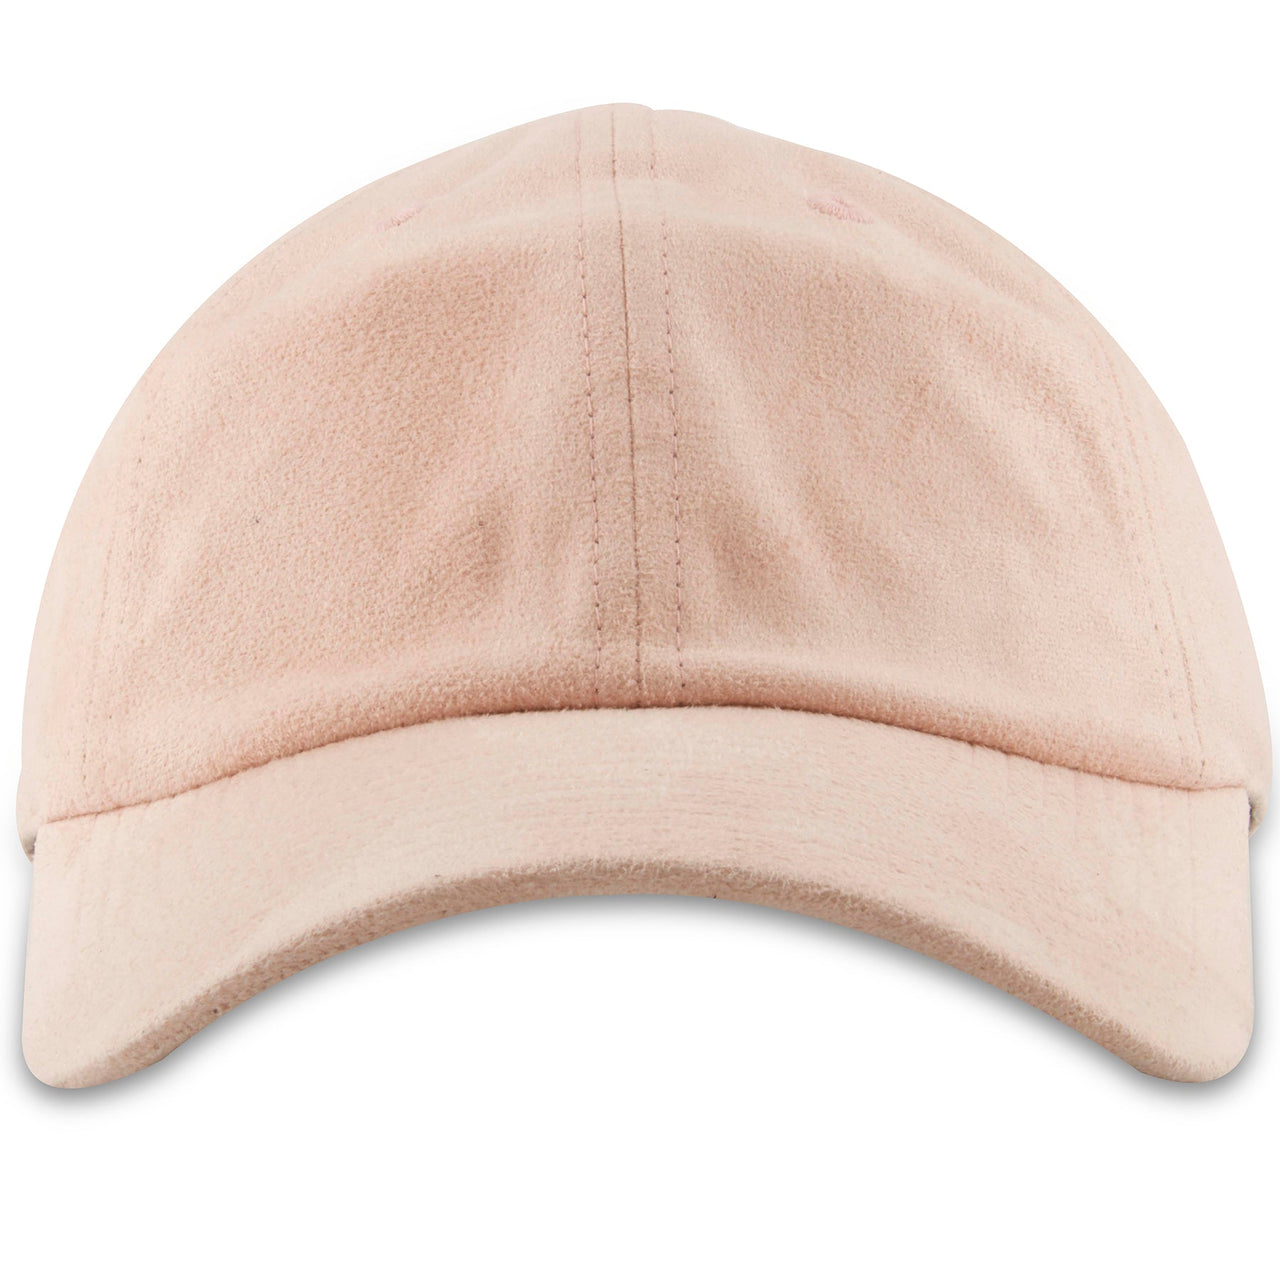 The pink suede baseball cap is solid pink with a pink unstructured crown and a pink bent brim